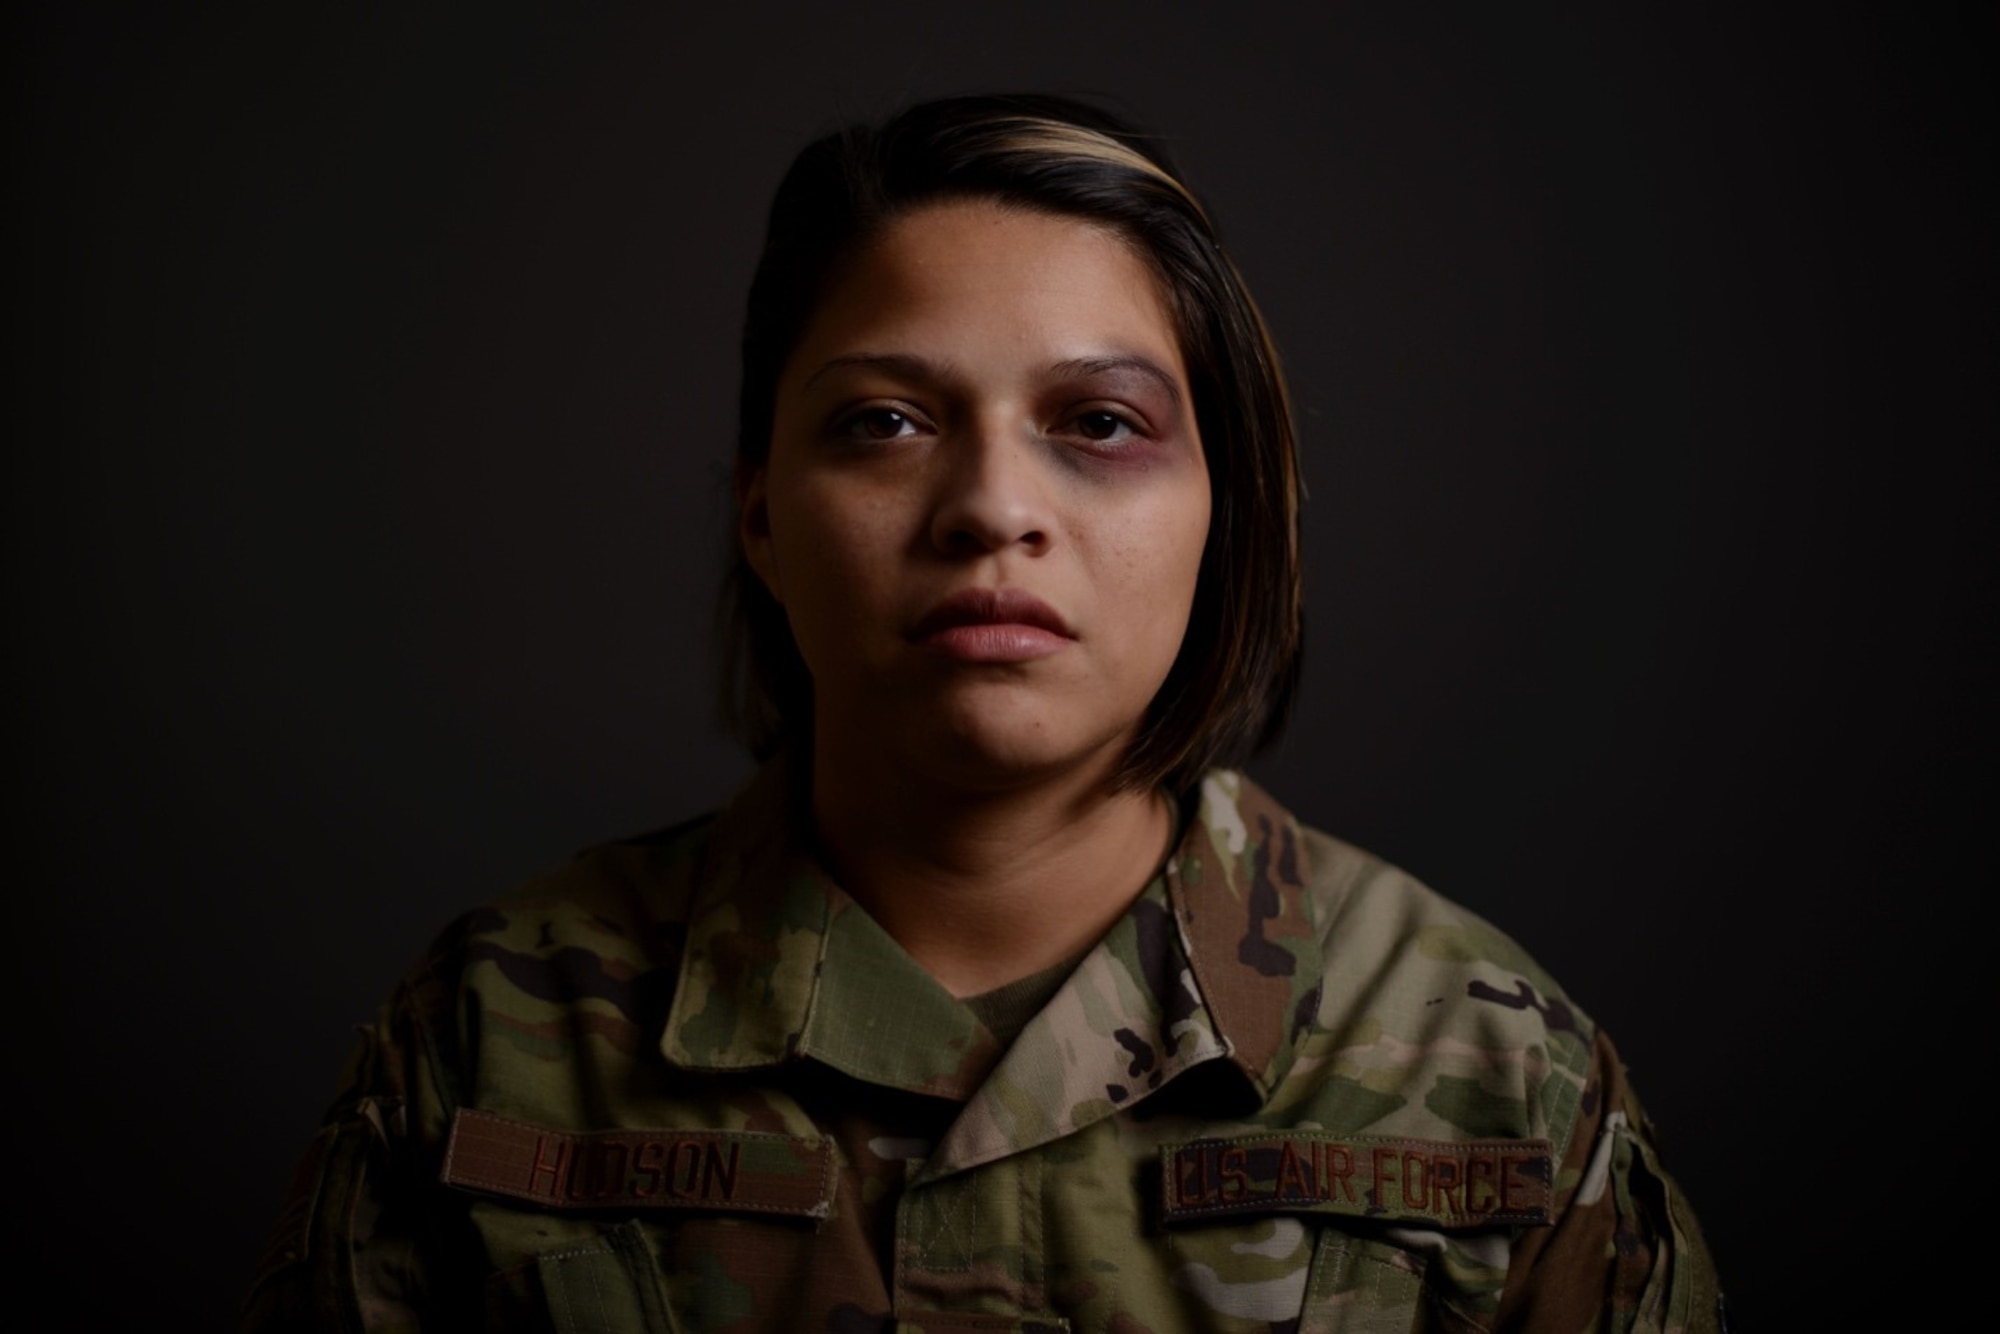 Senior Airman Jessica Hudson, 22nd Air Refueling Wing community support coordinator and violence prevention integrator assistant, displays a faux bruise on her eye Oct. 30, 2019, at McConnell Air Force Base, Kan. The Black Eye Campaign, hosted by McConnell’s Violence Prevention team, enabled volunteers to spend the day wearing a black eye in the hopes starting conversations and informing others of the stigmas surrounding domestic violence. The campaign sought to raise awareness and provide available resources for those affected. (U.S. Air Force photo by Airman 1st Class Nilsa E. Garcia)